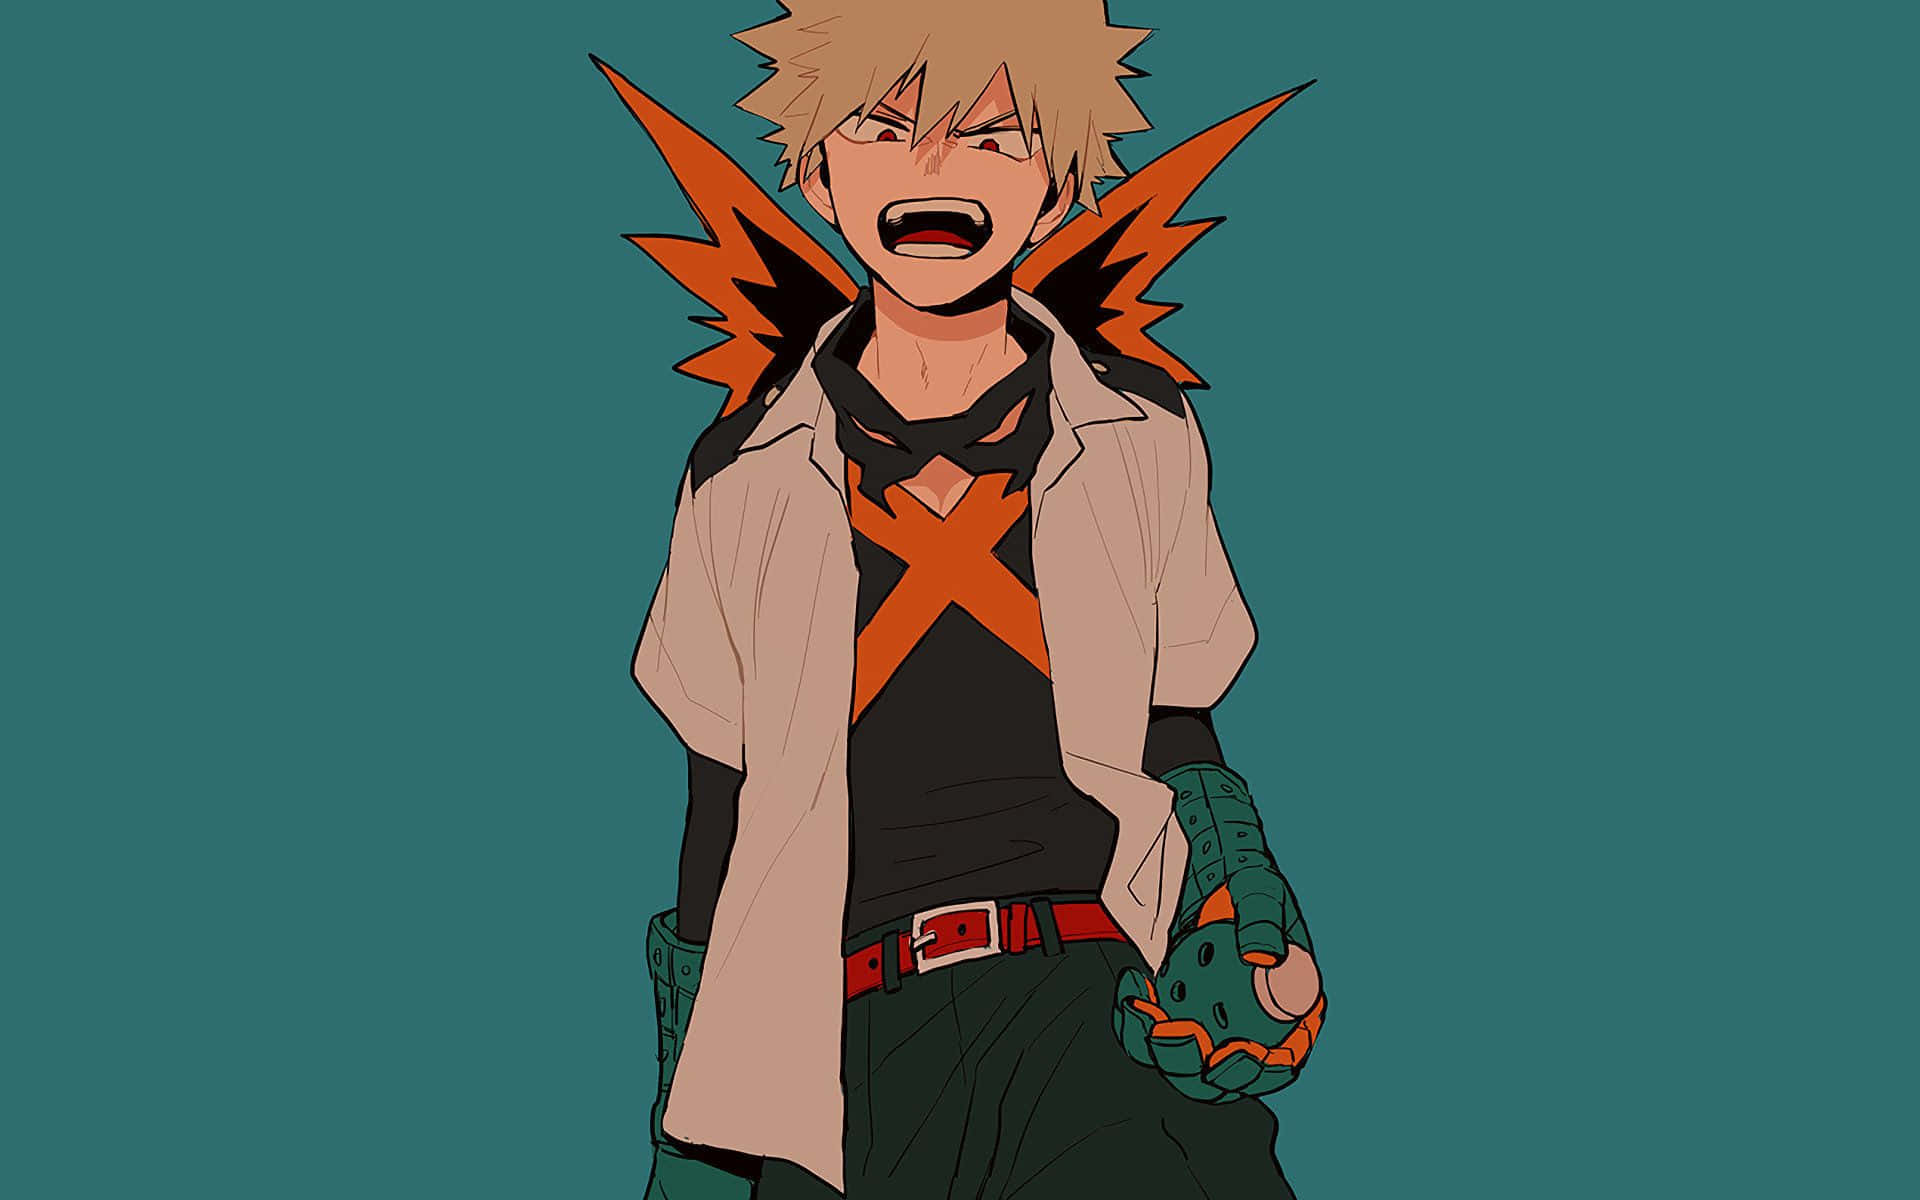 Midoriya from My Hero Academia with his arms crossed and a green background - Bakugo